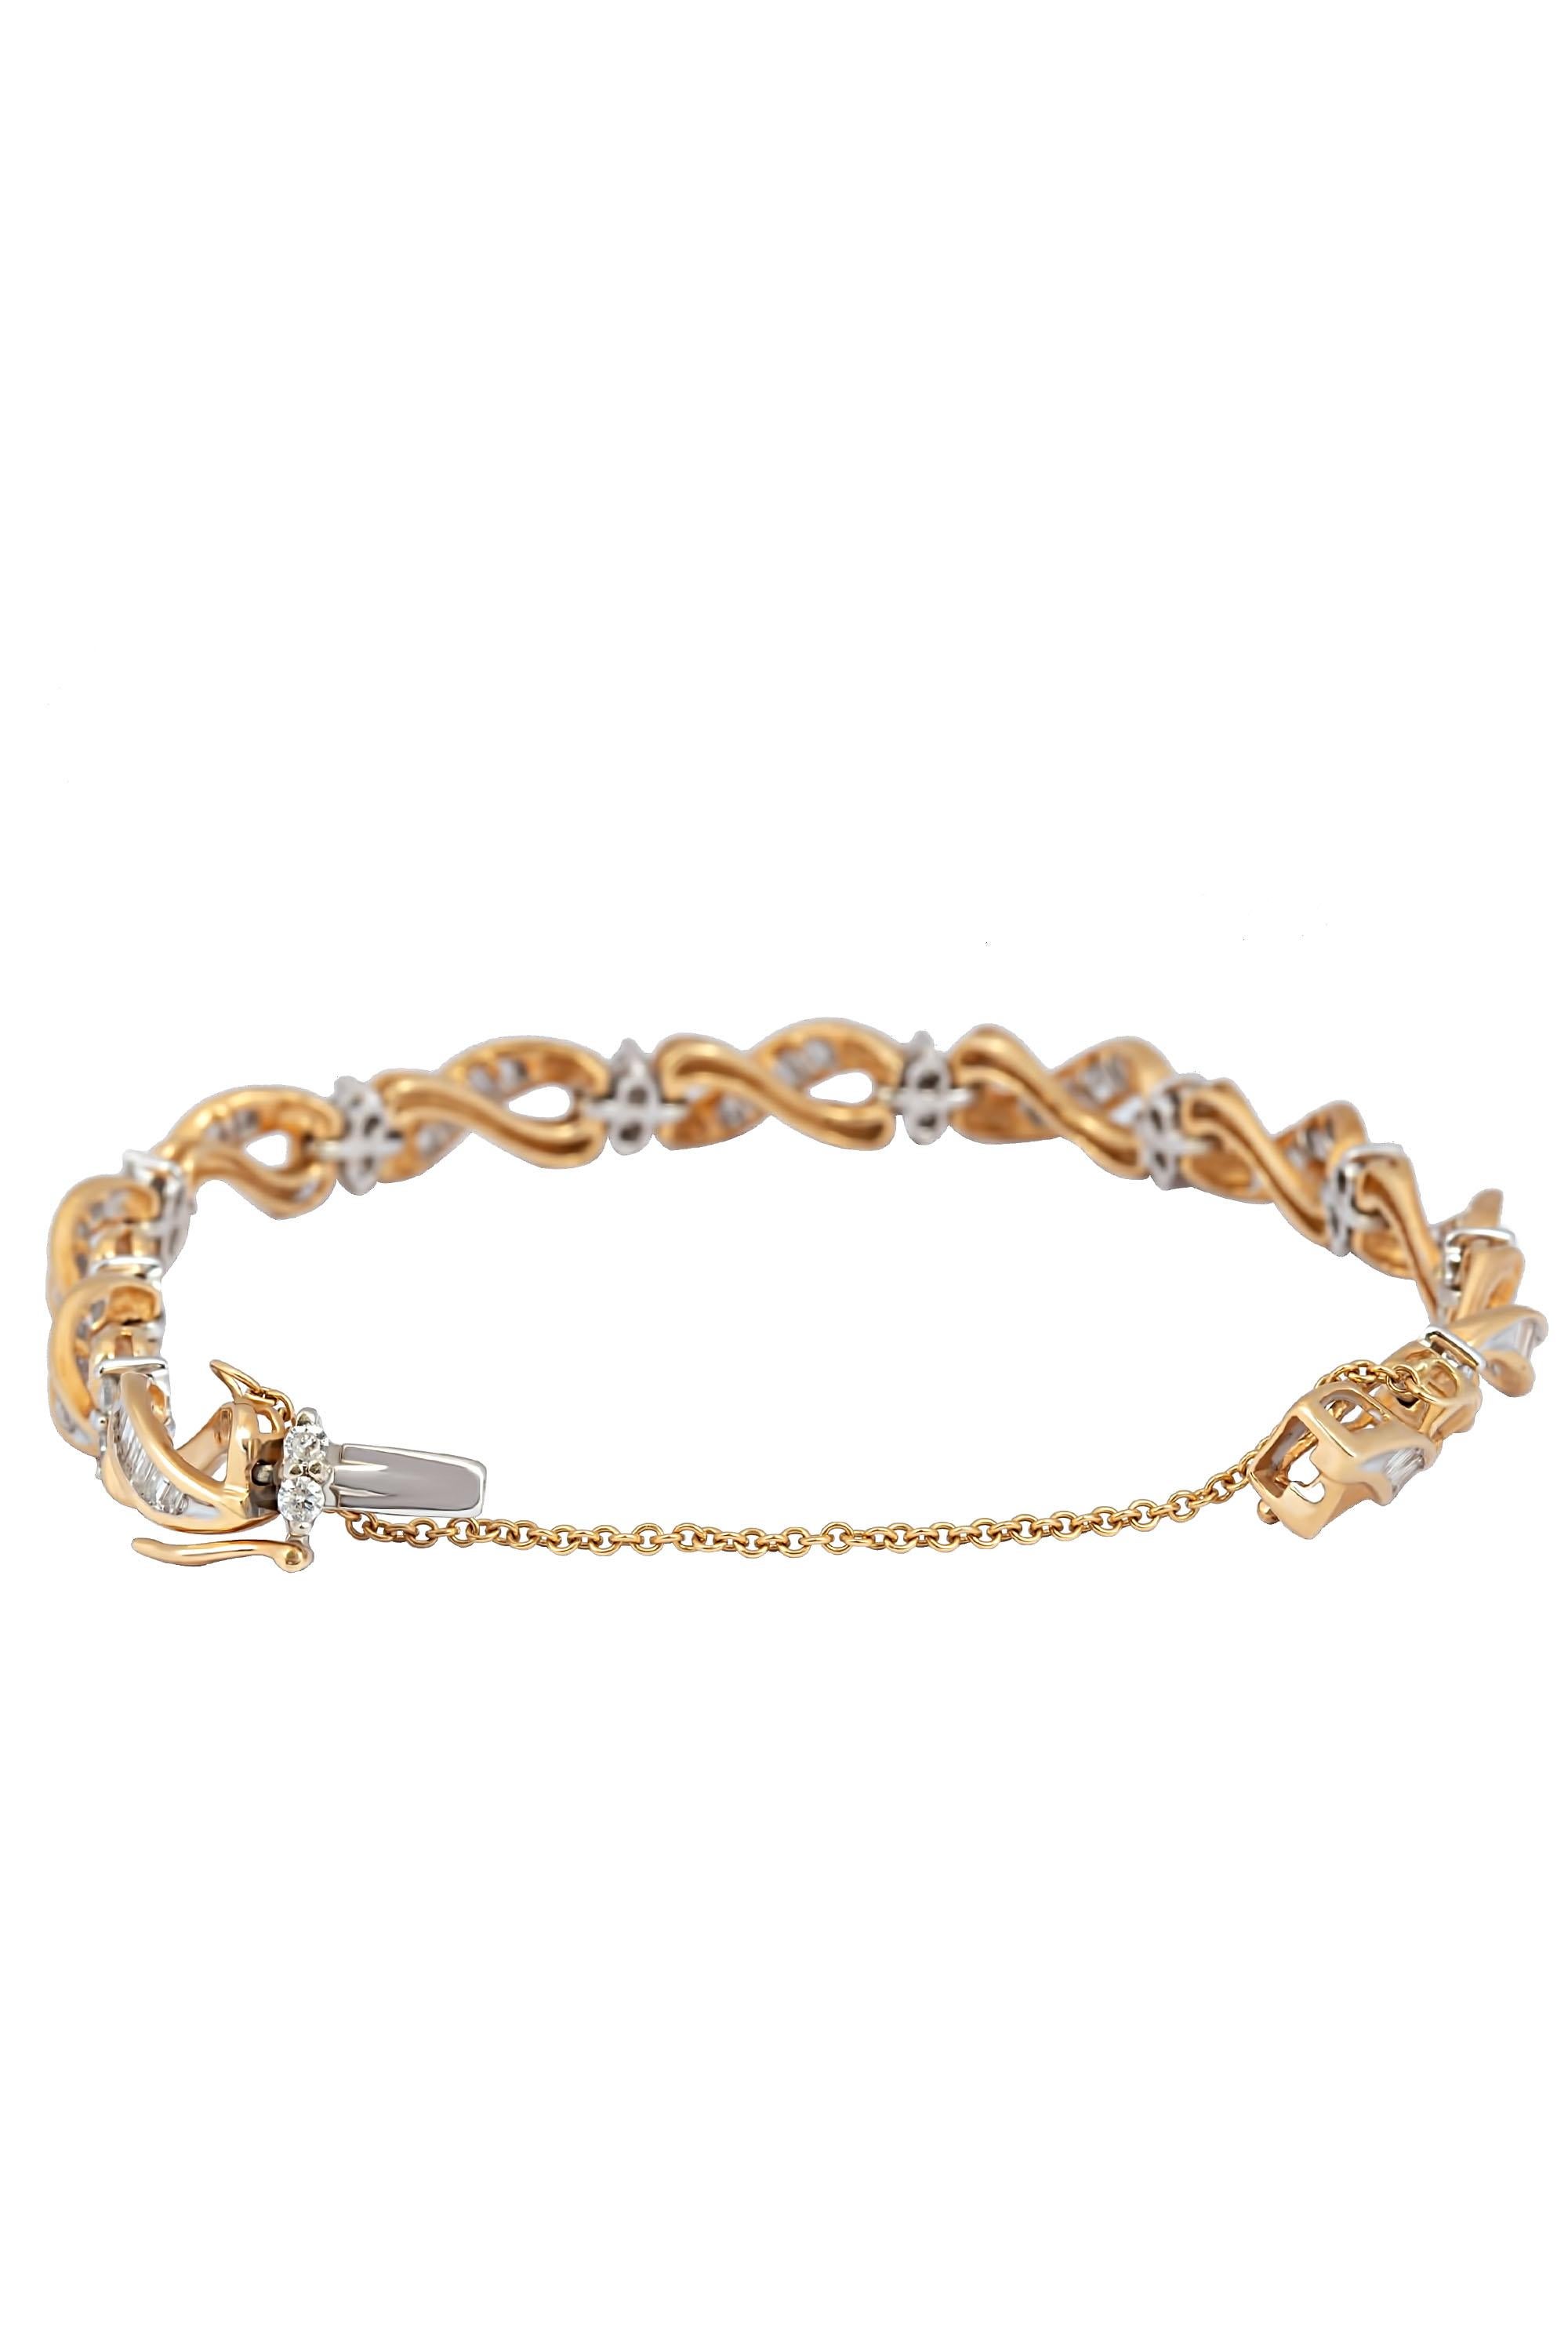 This graceful and sinuous bracelet is composed of brightly polished yellow gold infinity links set with gleaming white gold centers of bright baguette diamonds punctuated by white gold stations of two round brilliant diamonds. Crafted in 14 karat